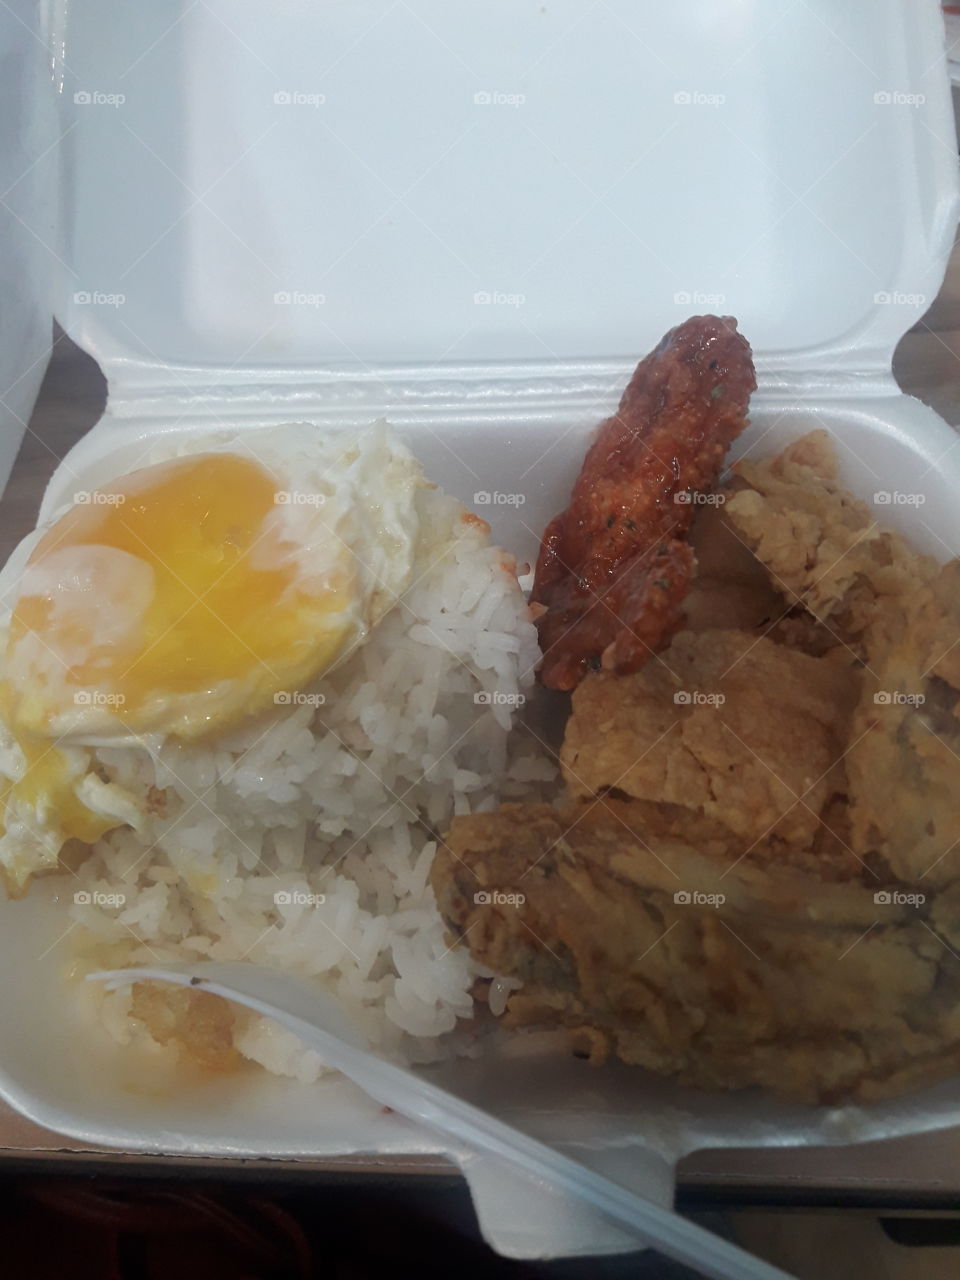 Filipino Dish - rice, fried wings and fried egg. This is awesome and delicious!!!